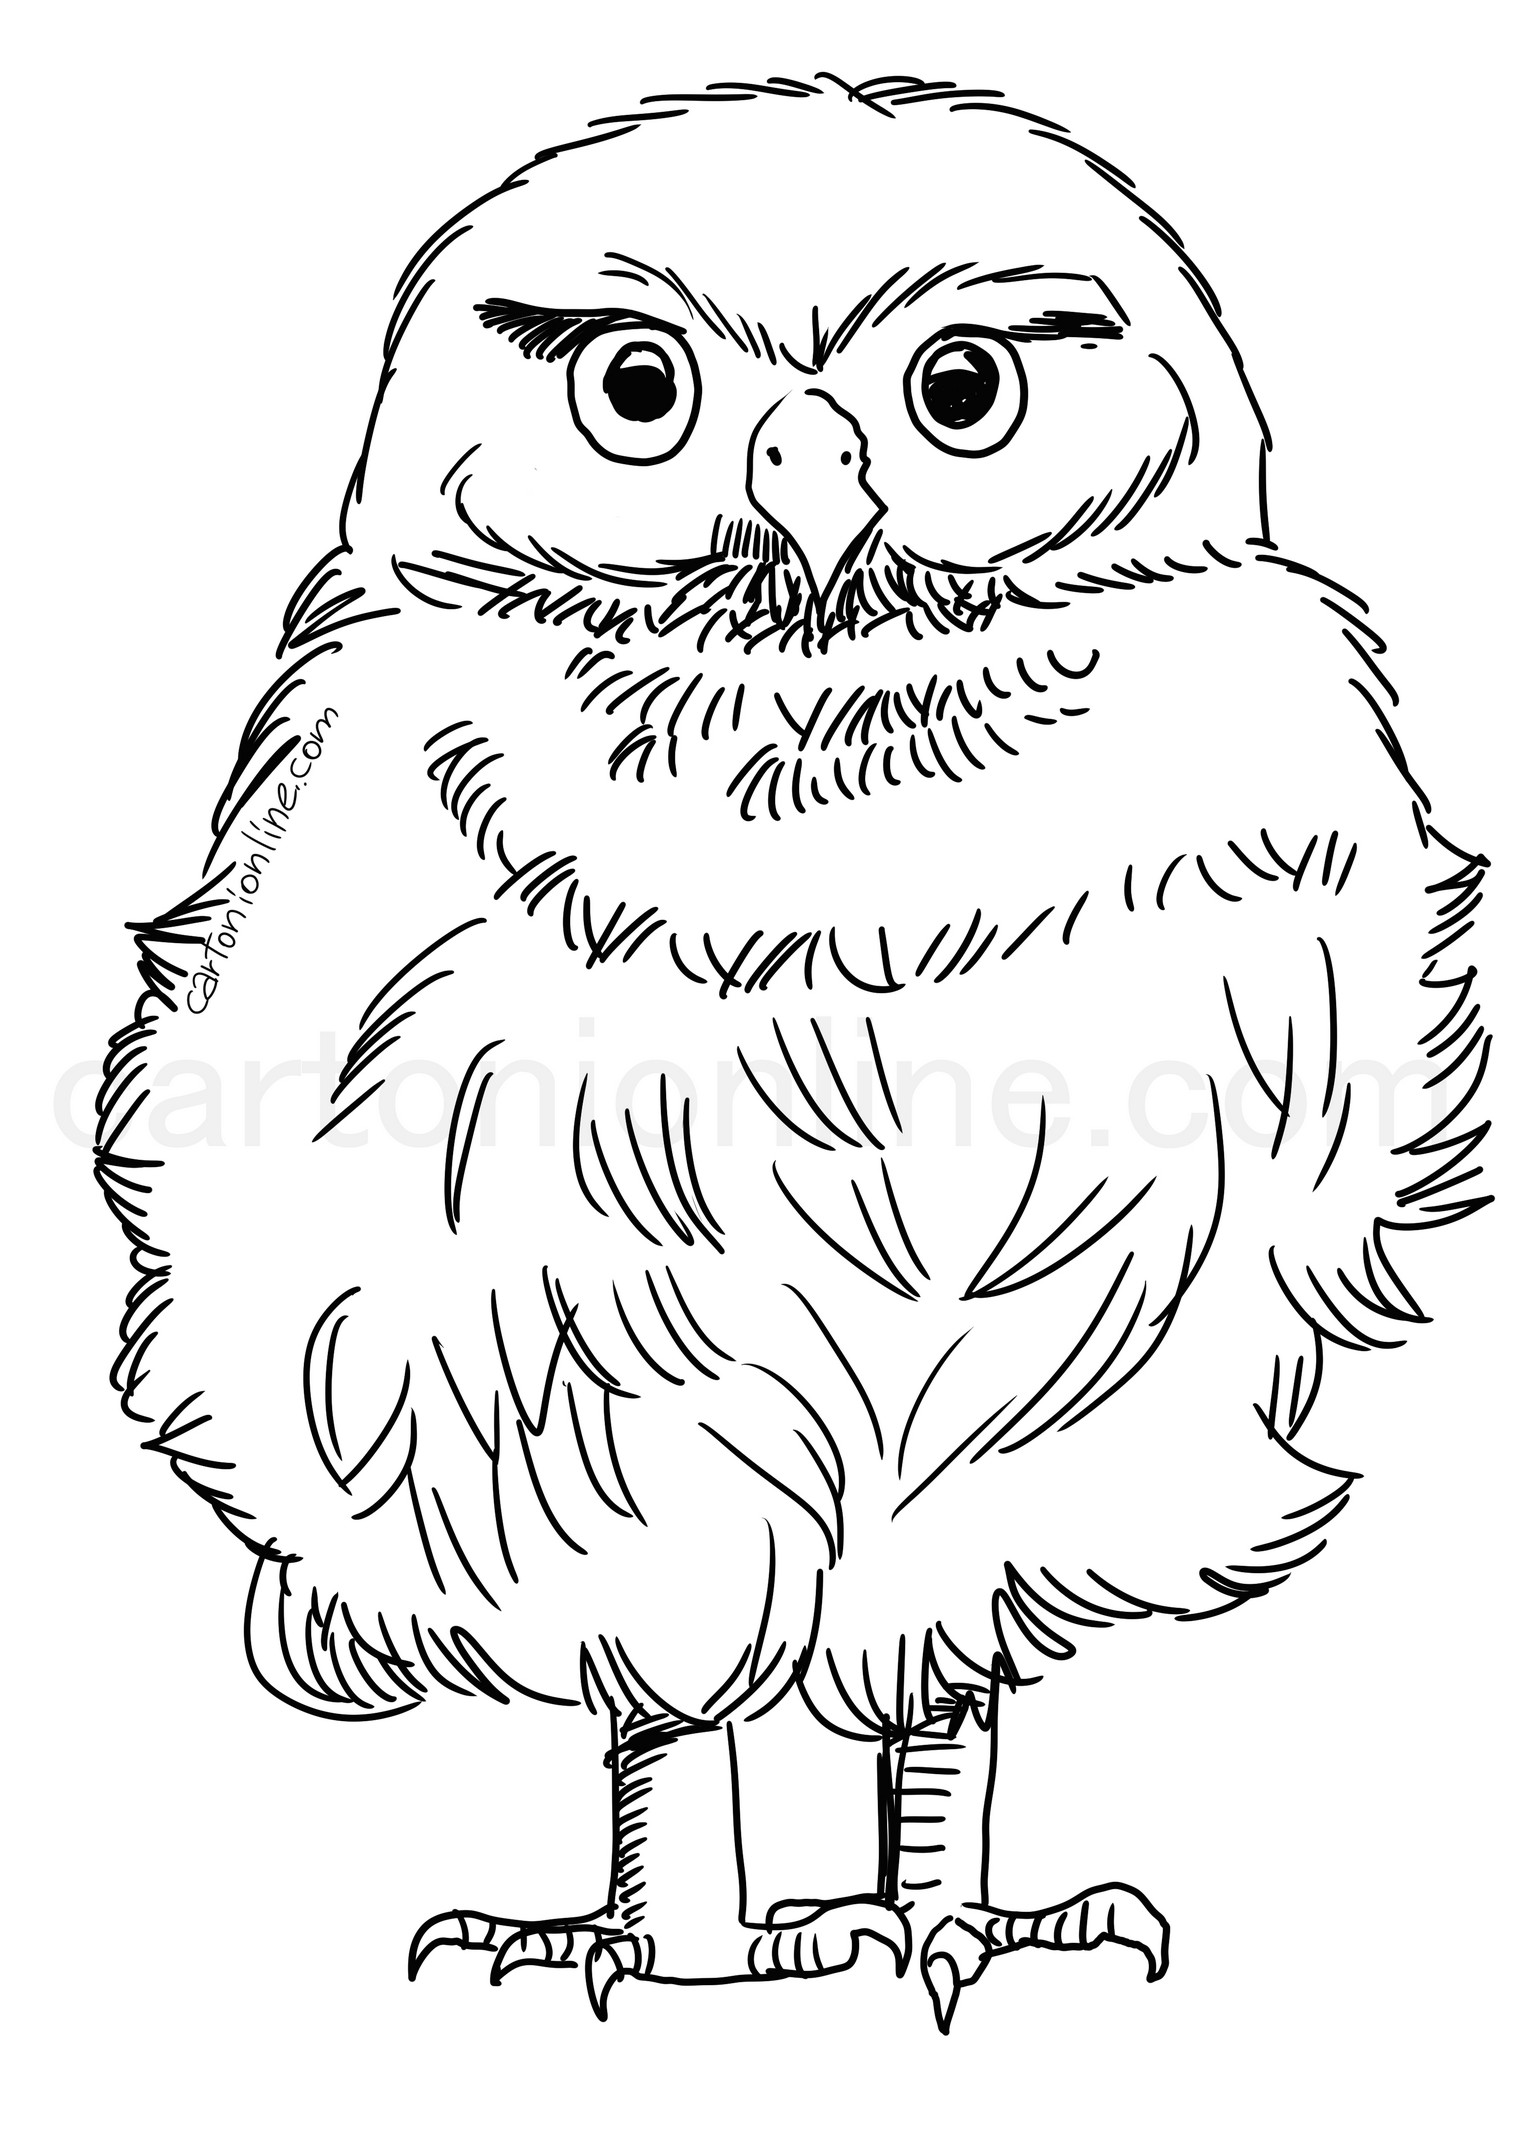 Realistic Owl coloring page